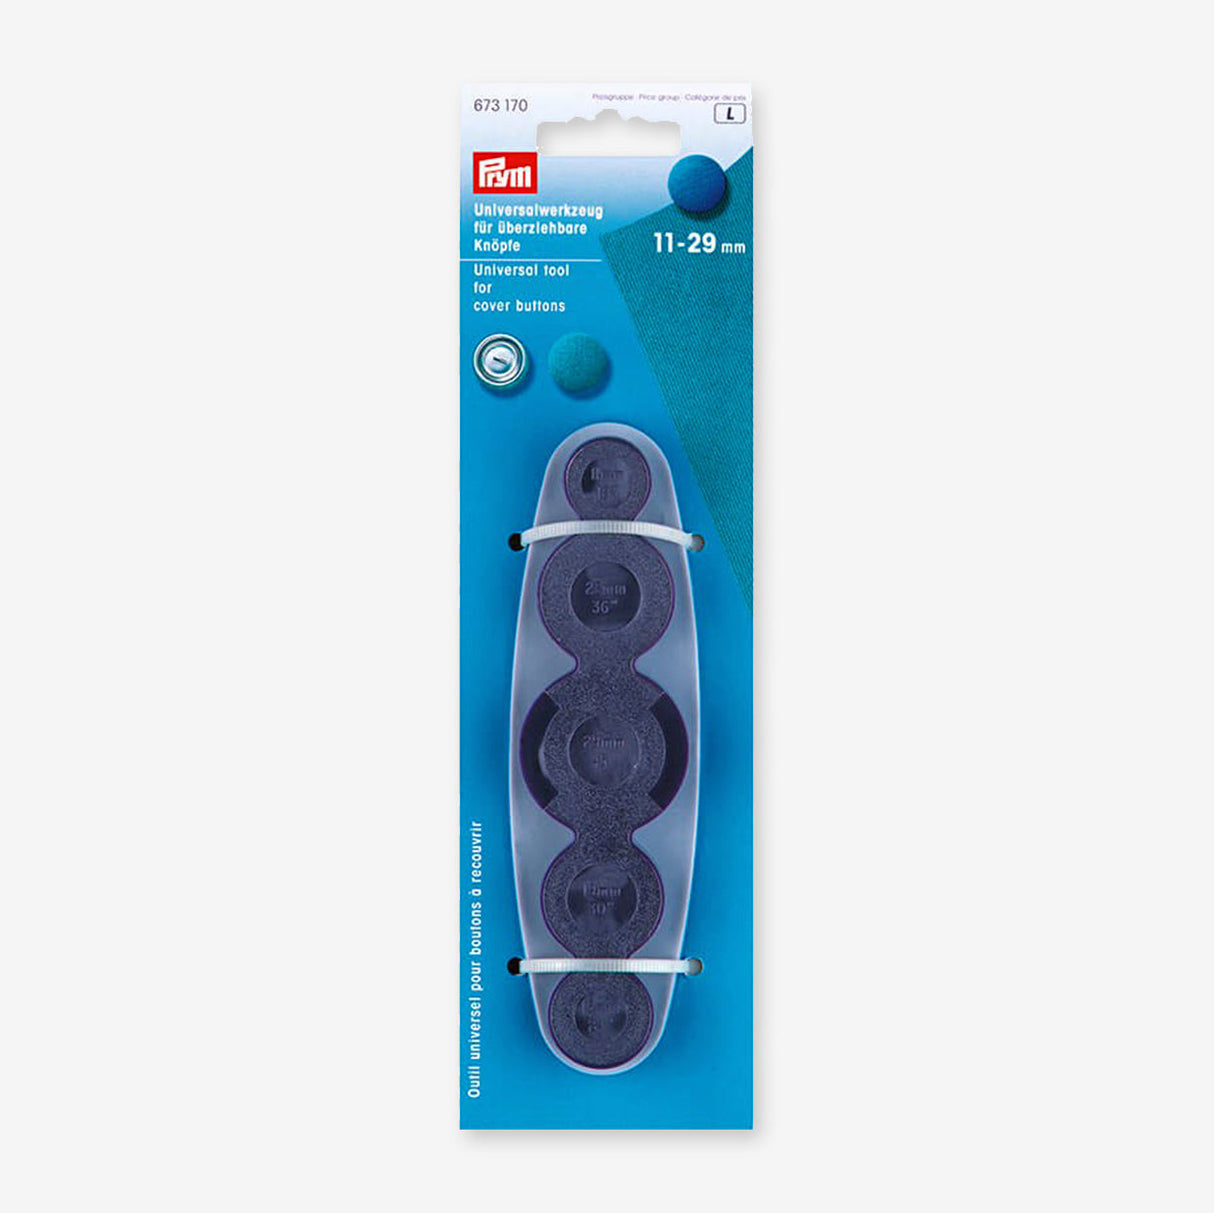 Prym 673170 Button Covering Tool: Personalize your Garments and Projects with Style